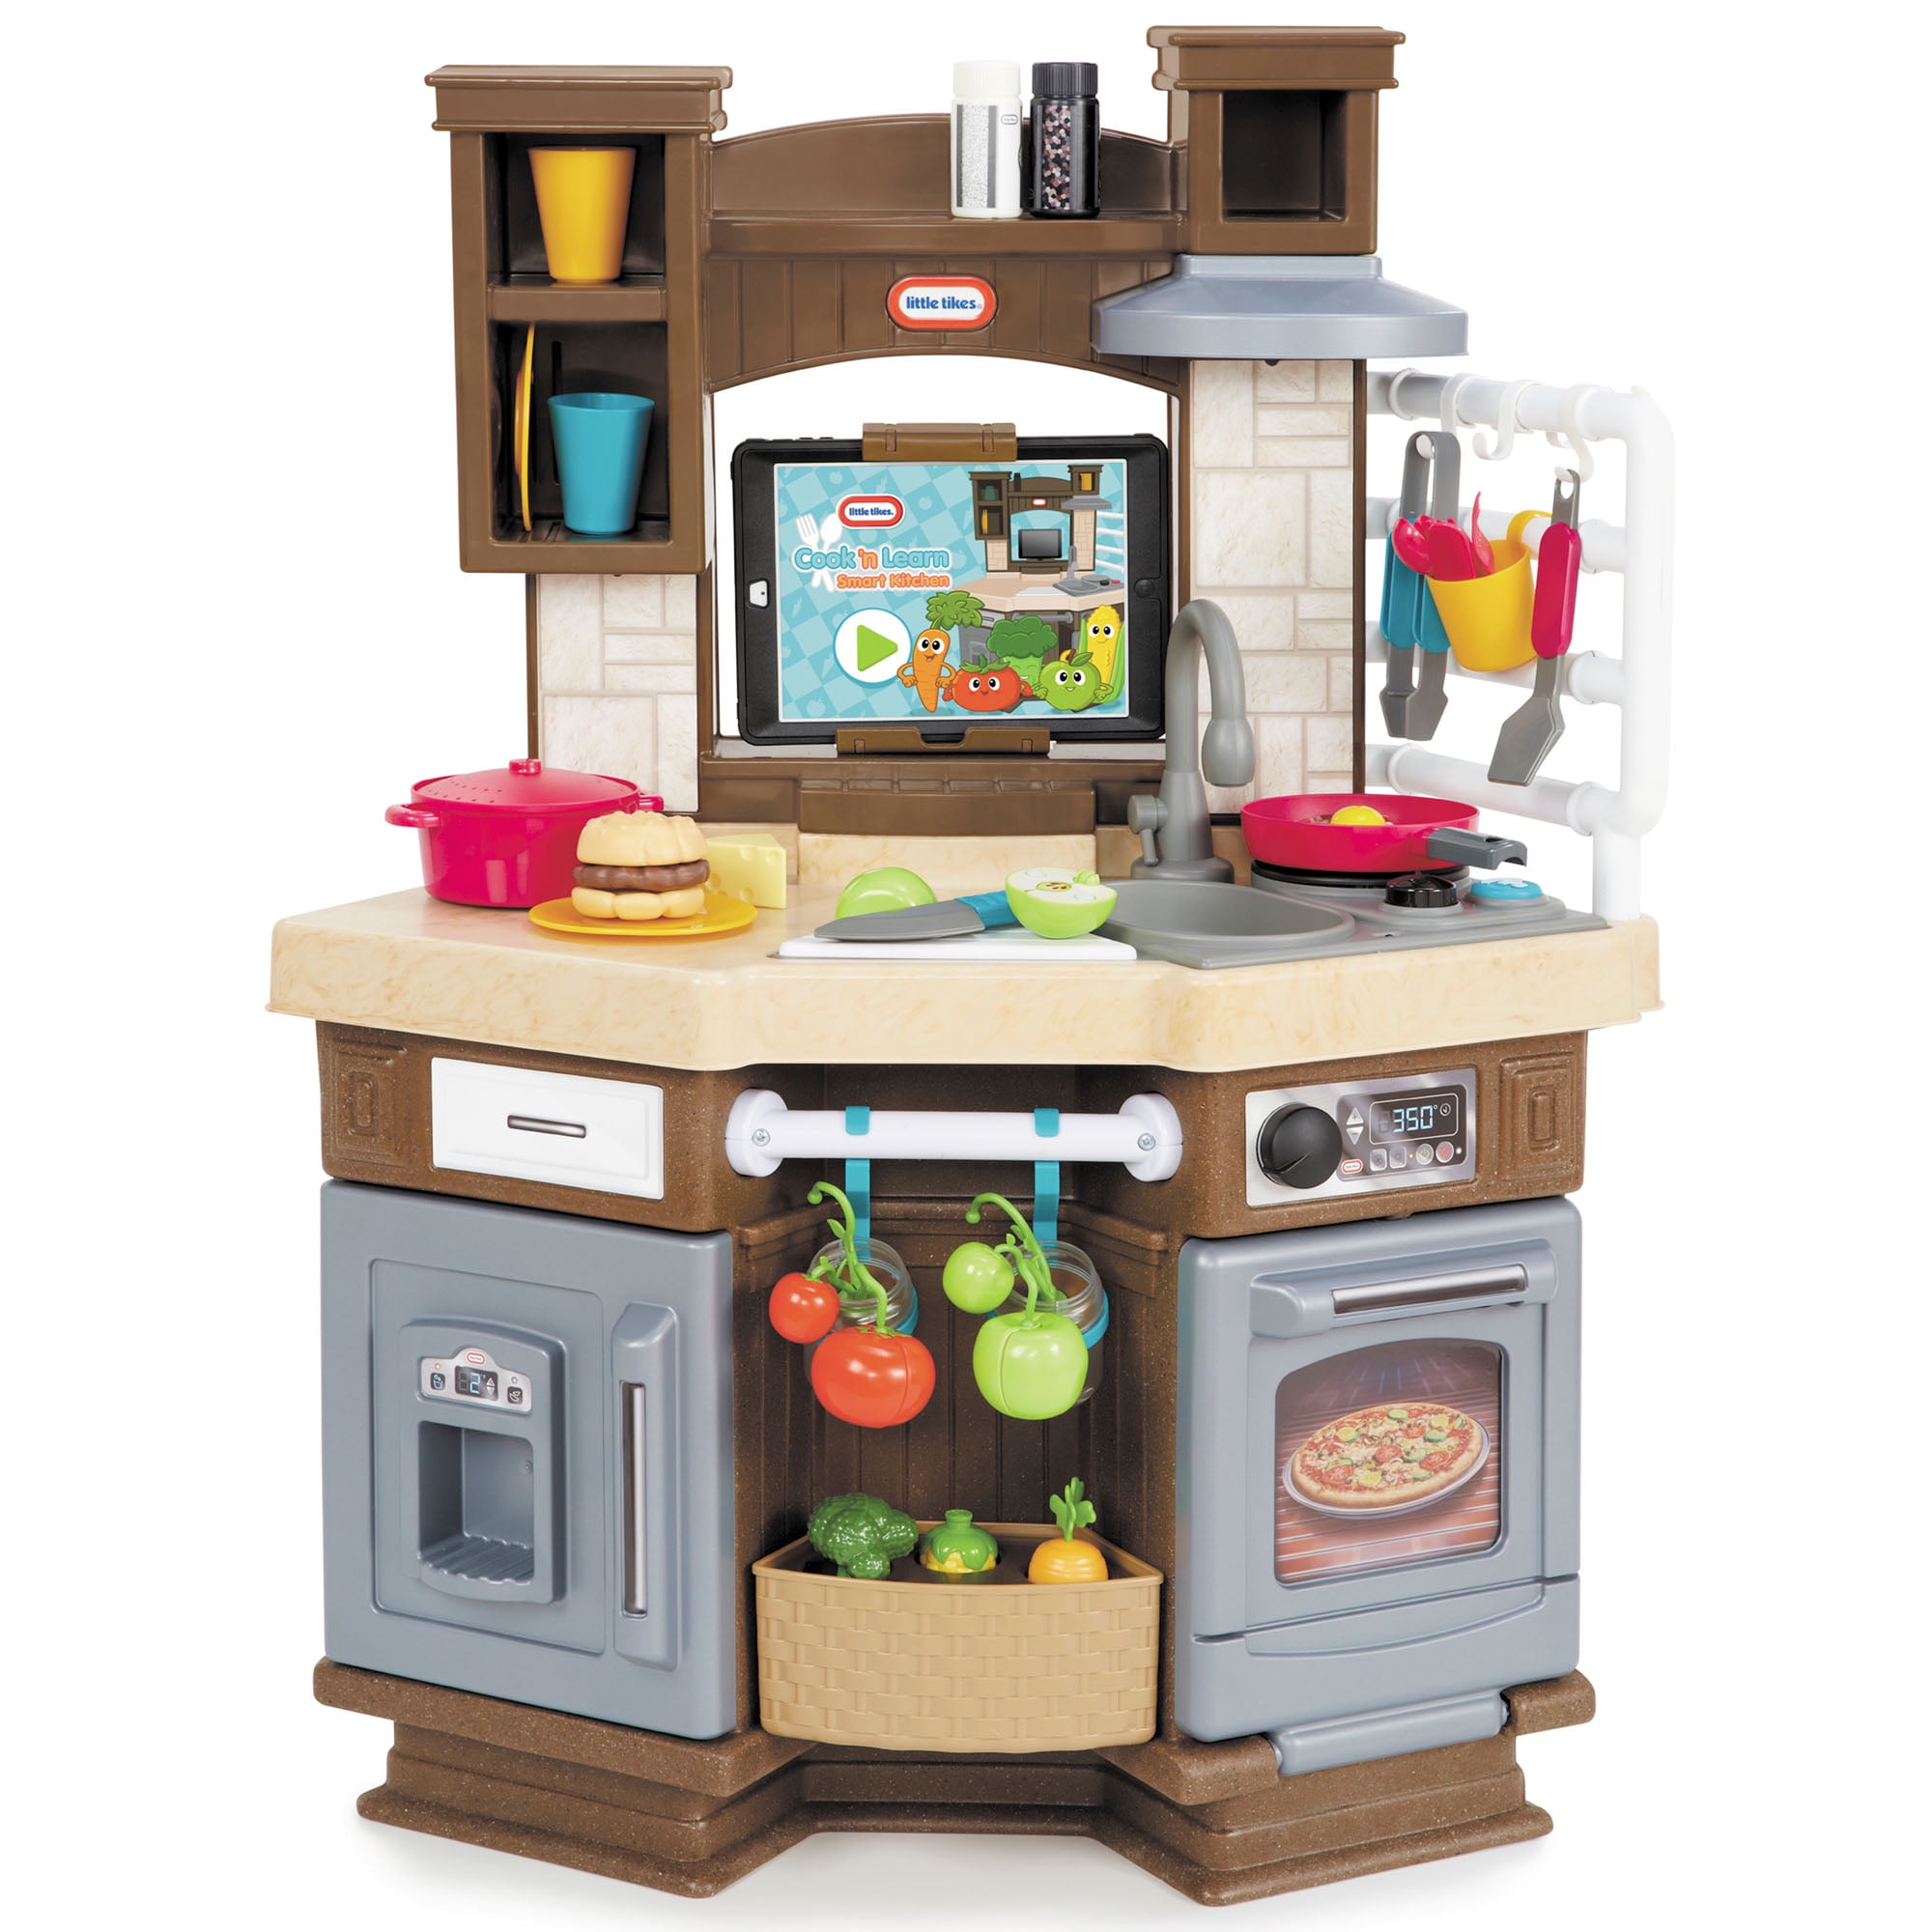 Little Tikes Cook 'n Learn Smart Play 